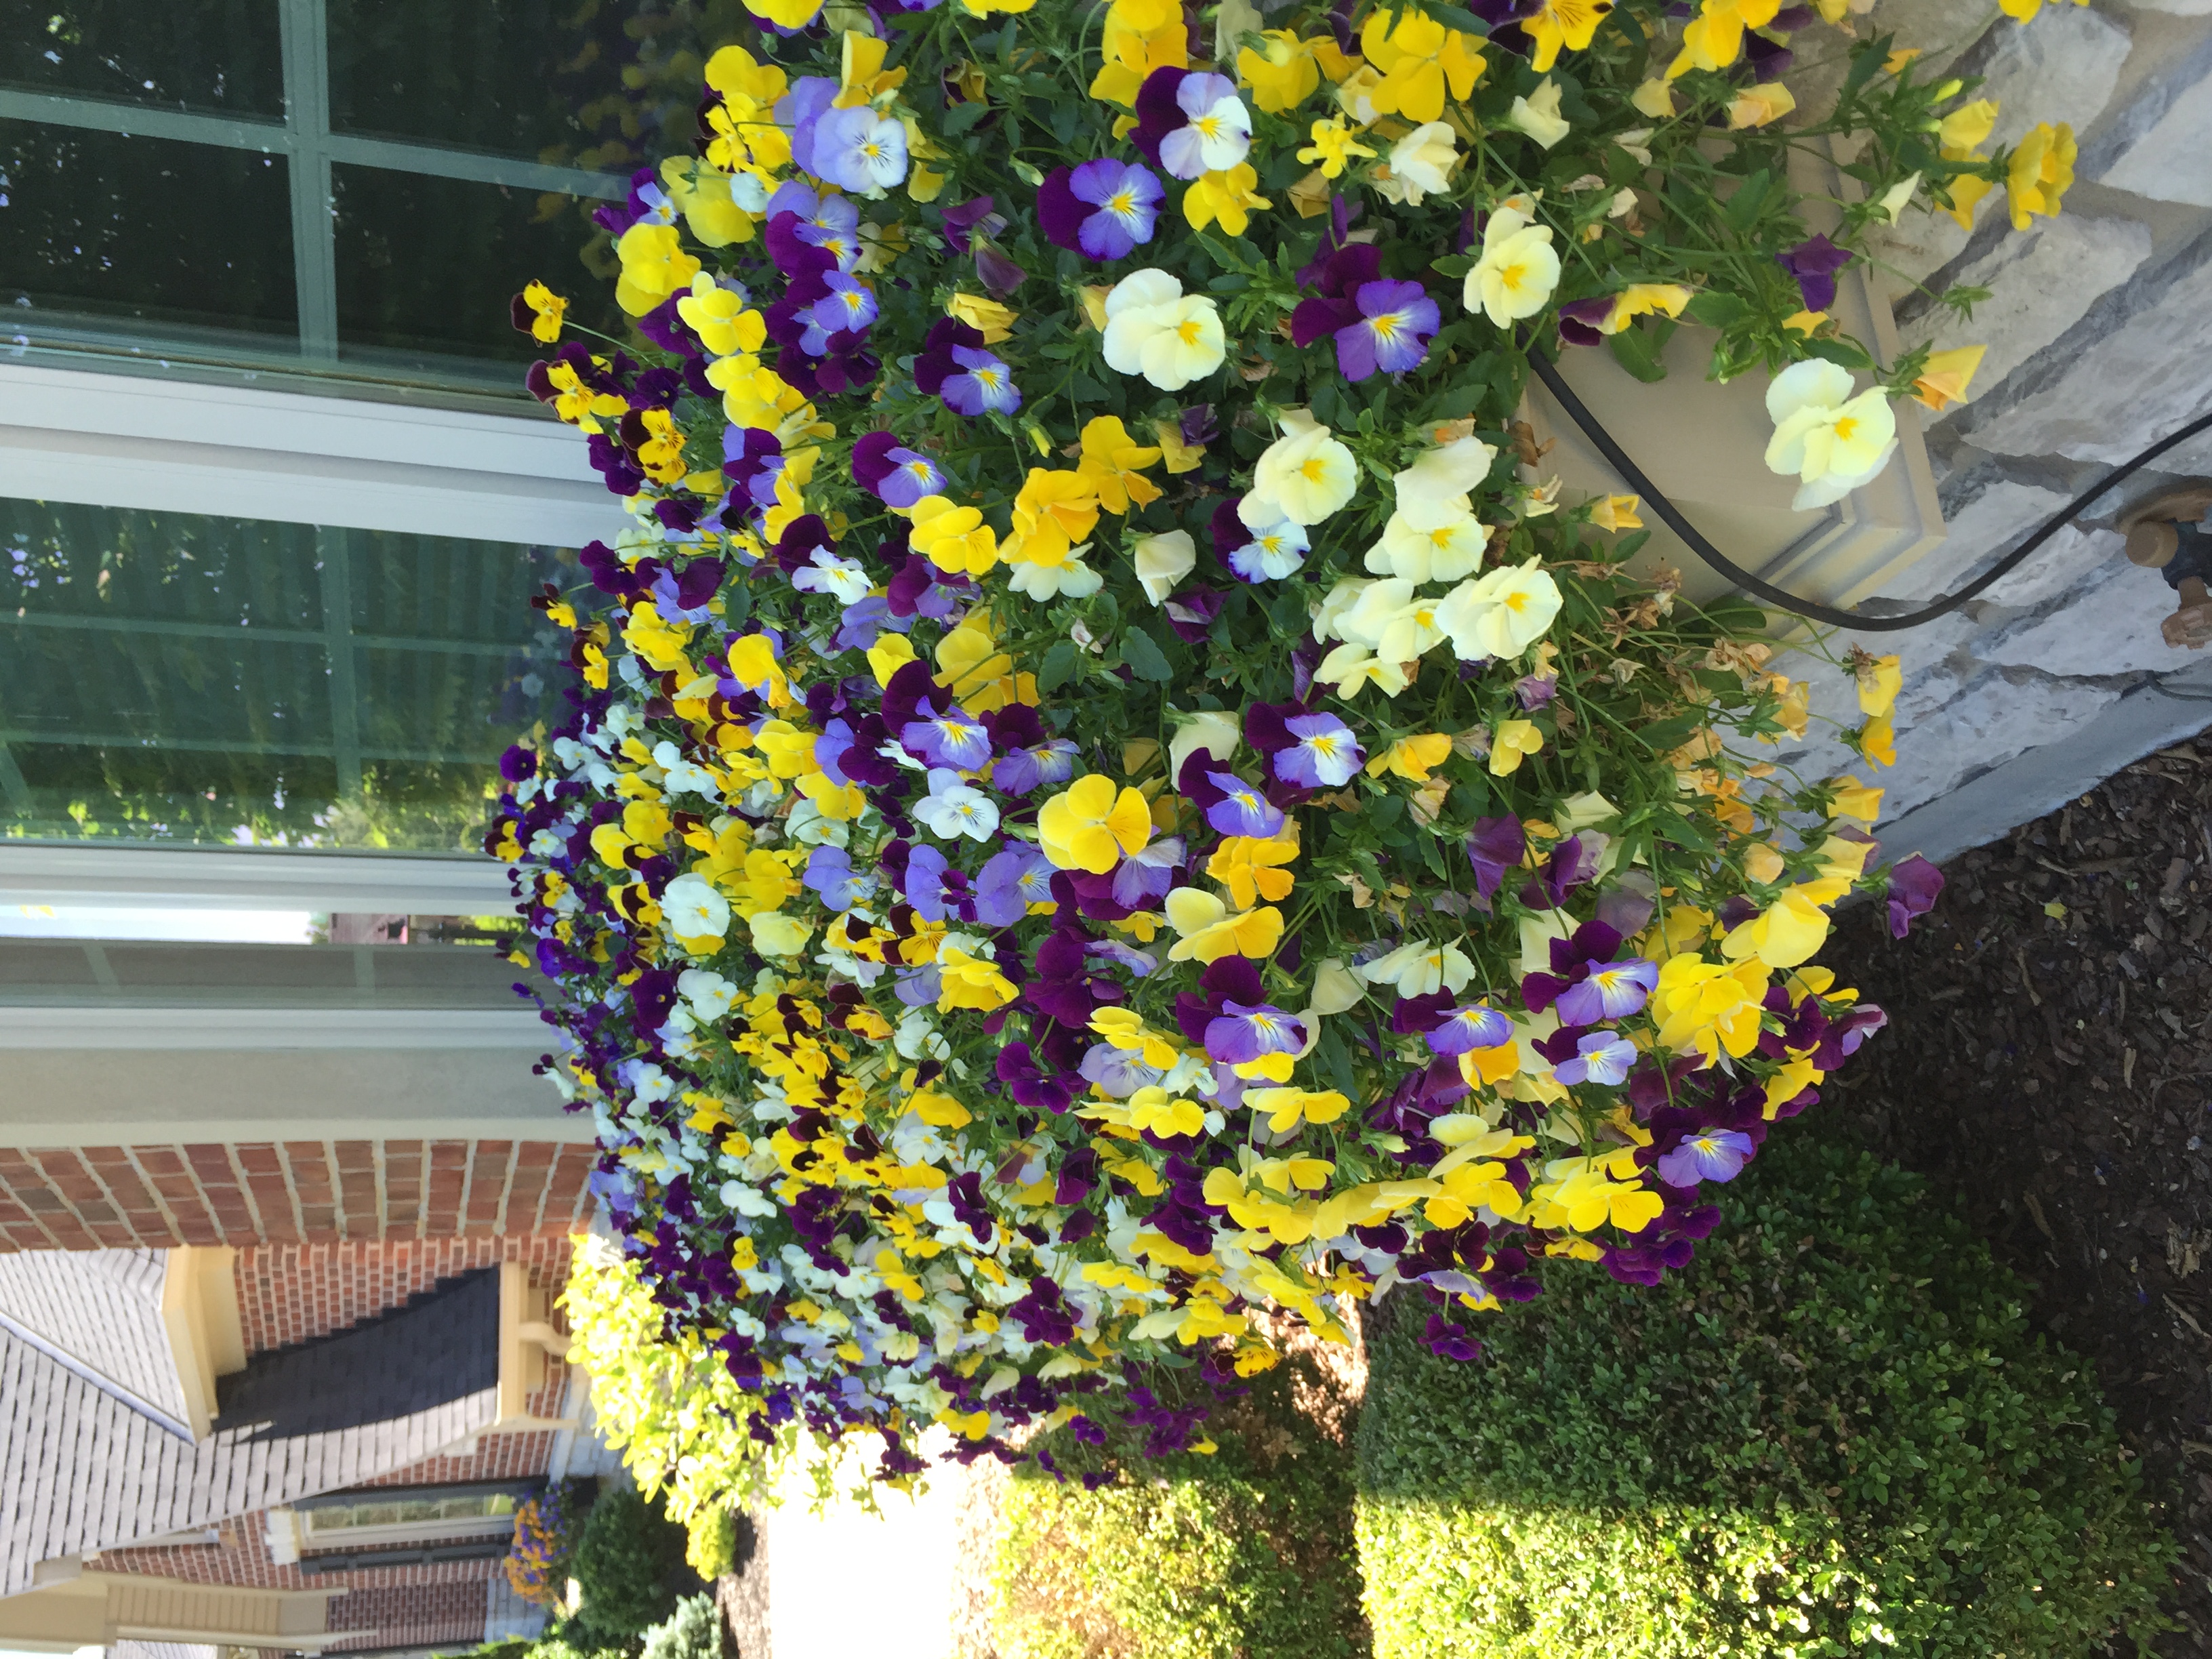 Spring color ads beauty to any home in a WOW Windowbox